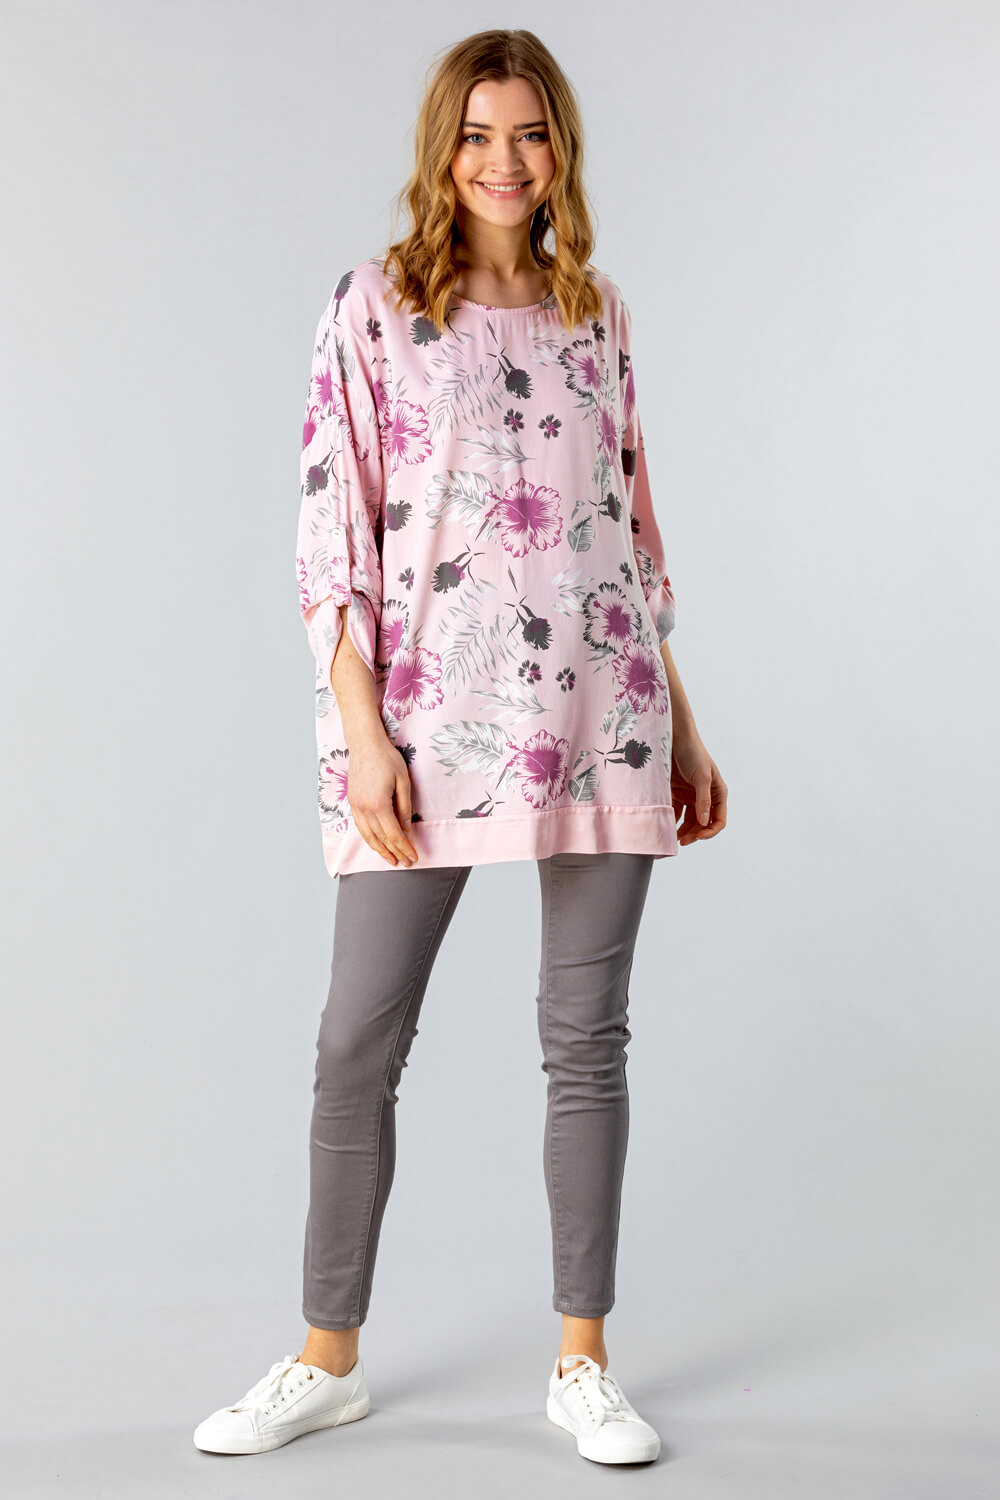 PINK Floral Print Longline Tunic Top, Image 3 of 4